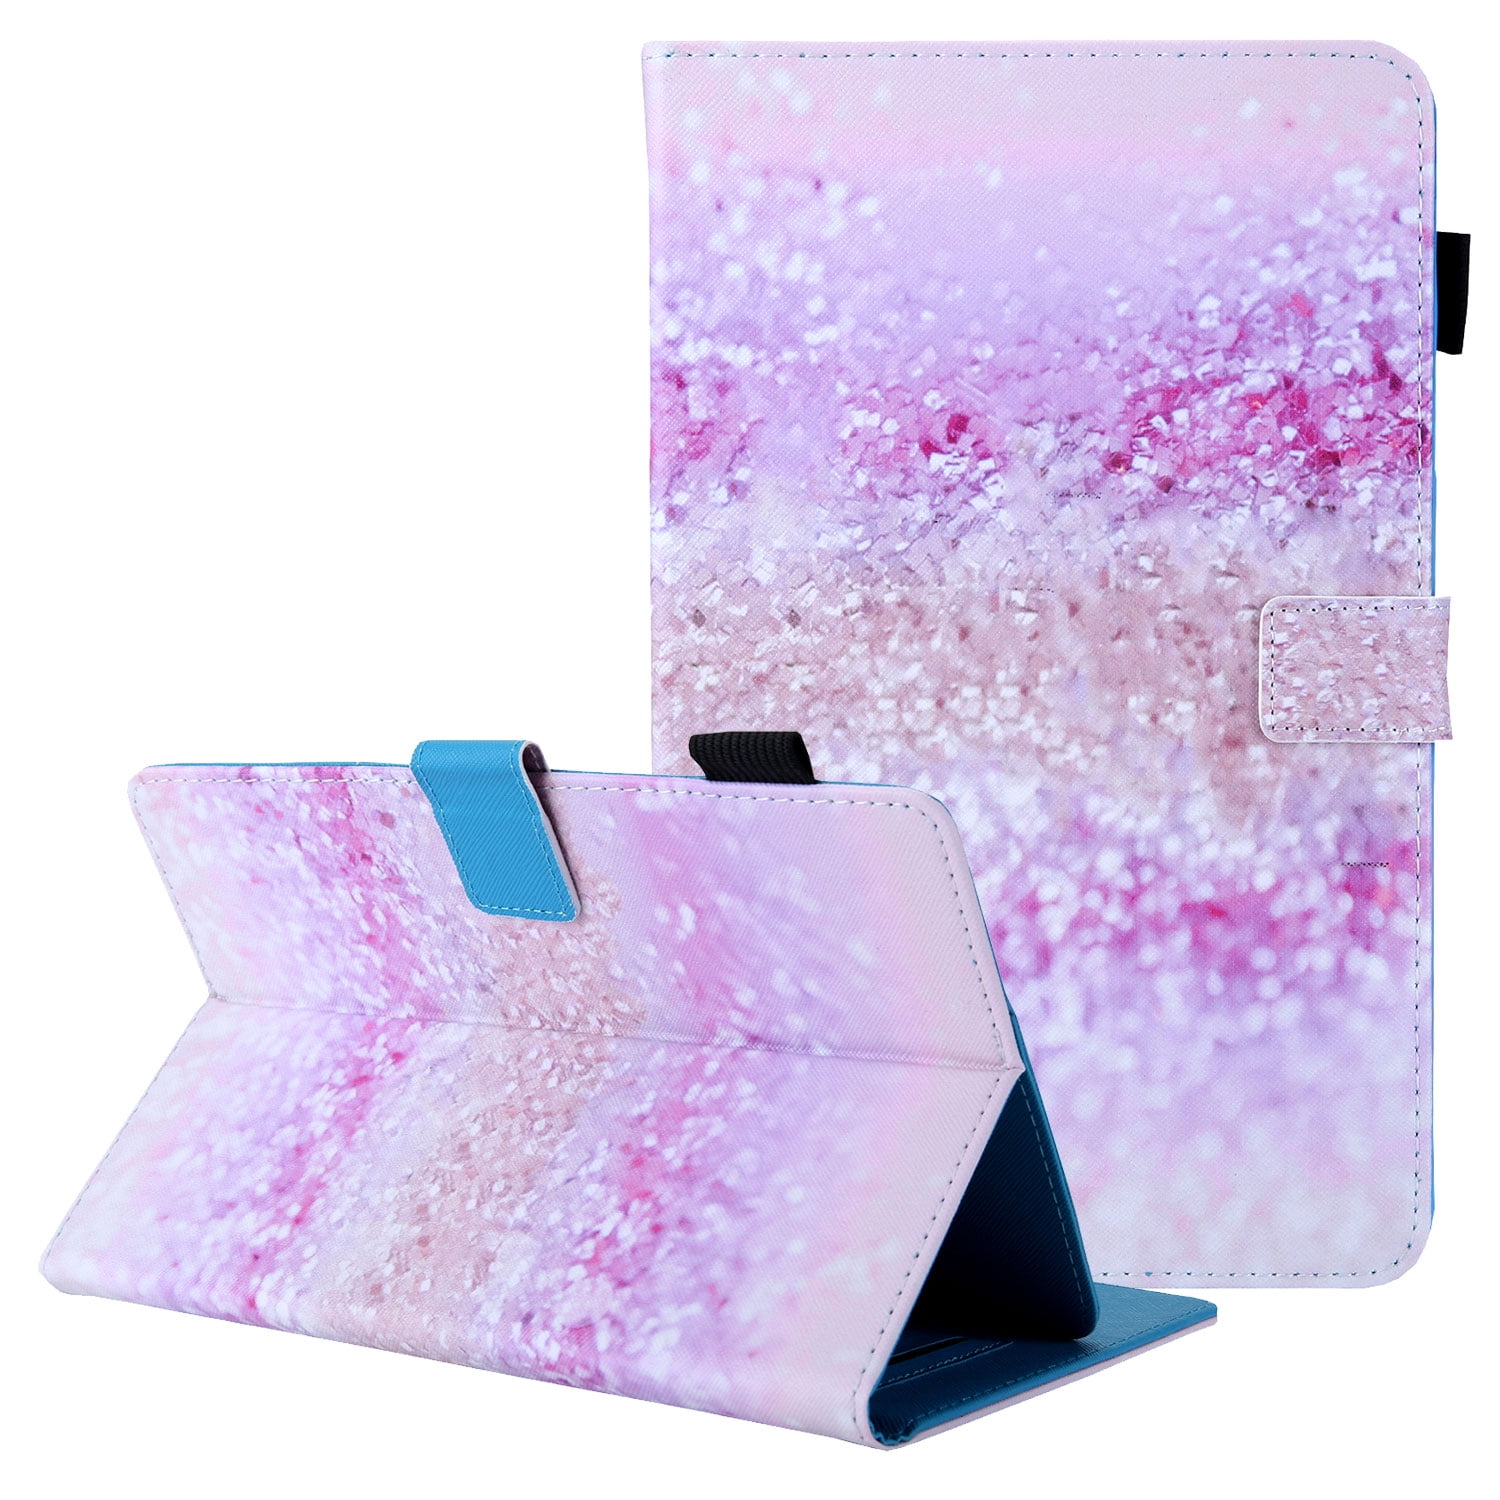 Kreta Grommen Kolonel Universal Case for 7 inch Tablet, Allytech Stand Card Pocket Cover with  Pencil for 6.8" 7" Samsung Galaxy Tab 2/3/4/A/E 7.0/Fire 7/for HP/for  Huawei/for Asus and Other 6.5"-7.5" Tablet,Pink Glitter - Walmart.com